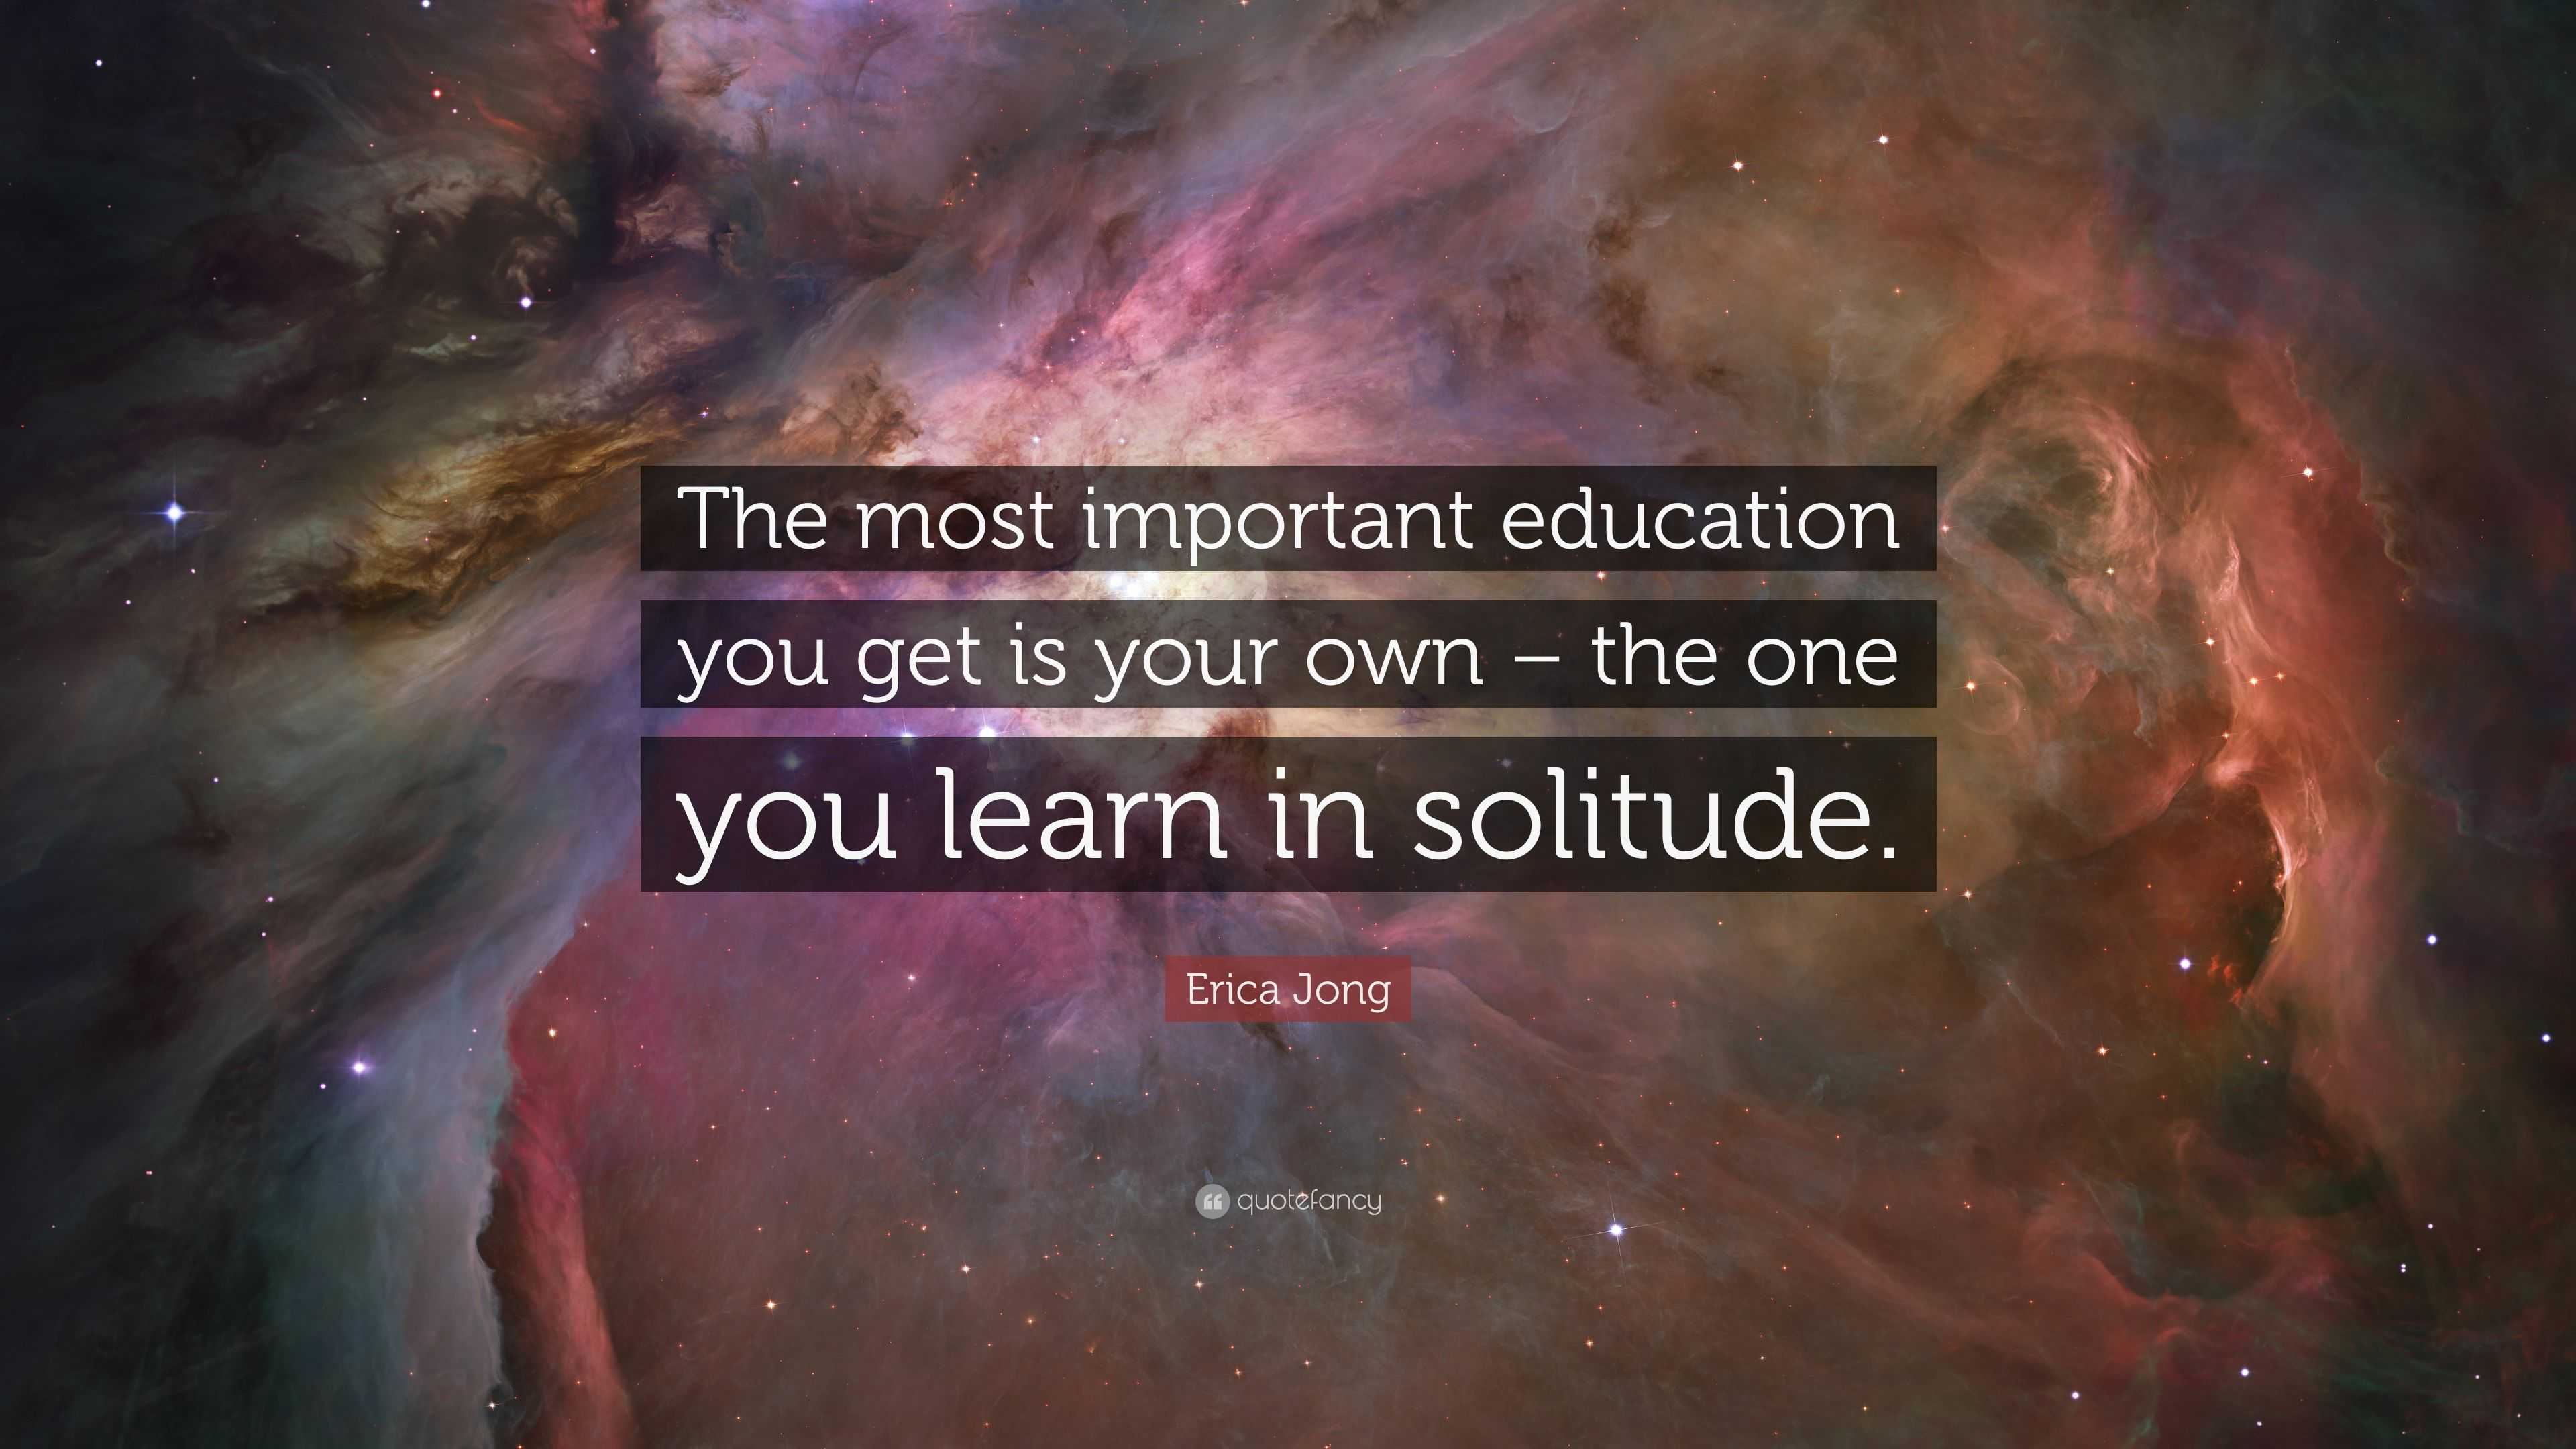 Erica Jong Quote: “The most important education you get is your own ...